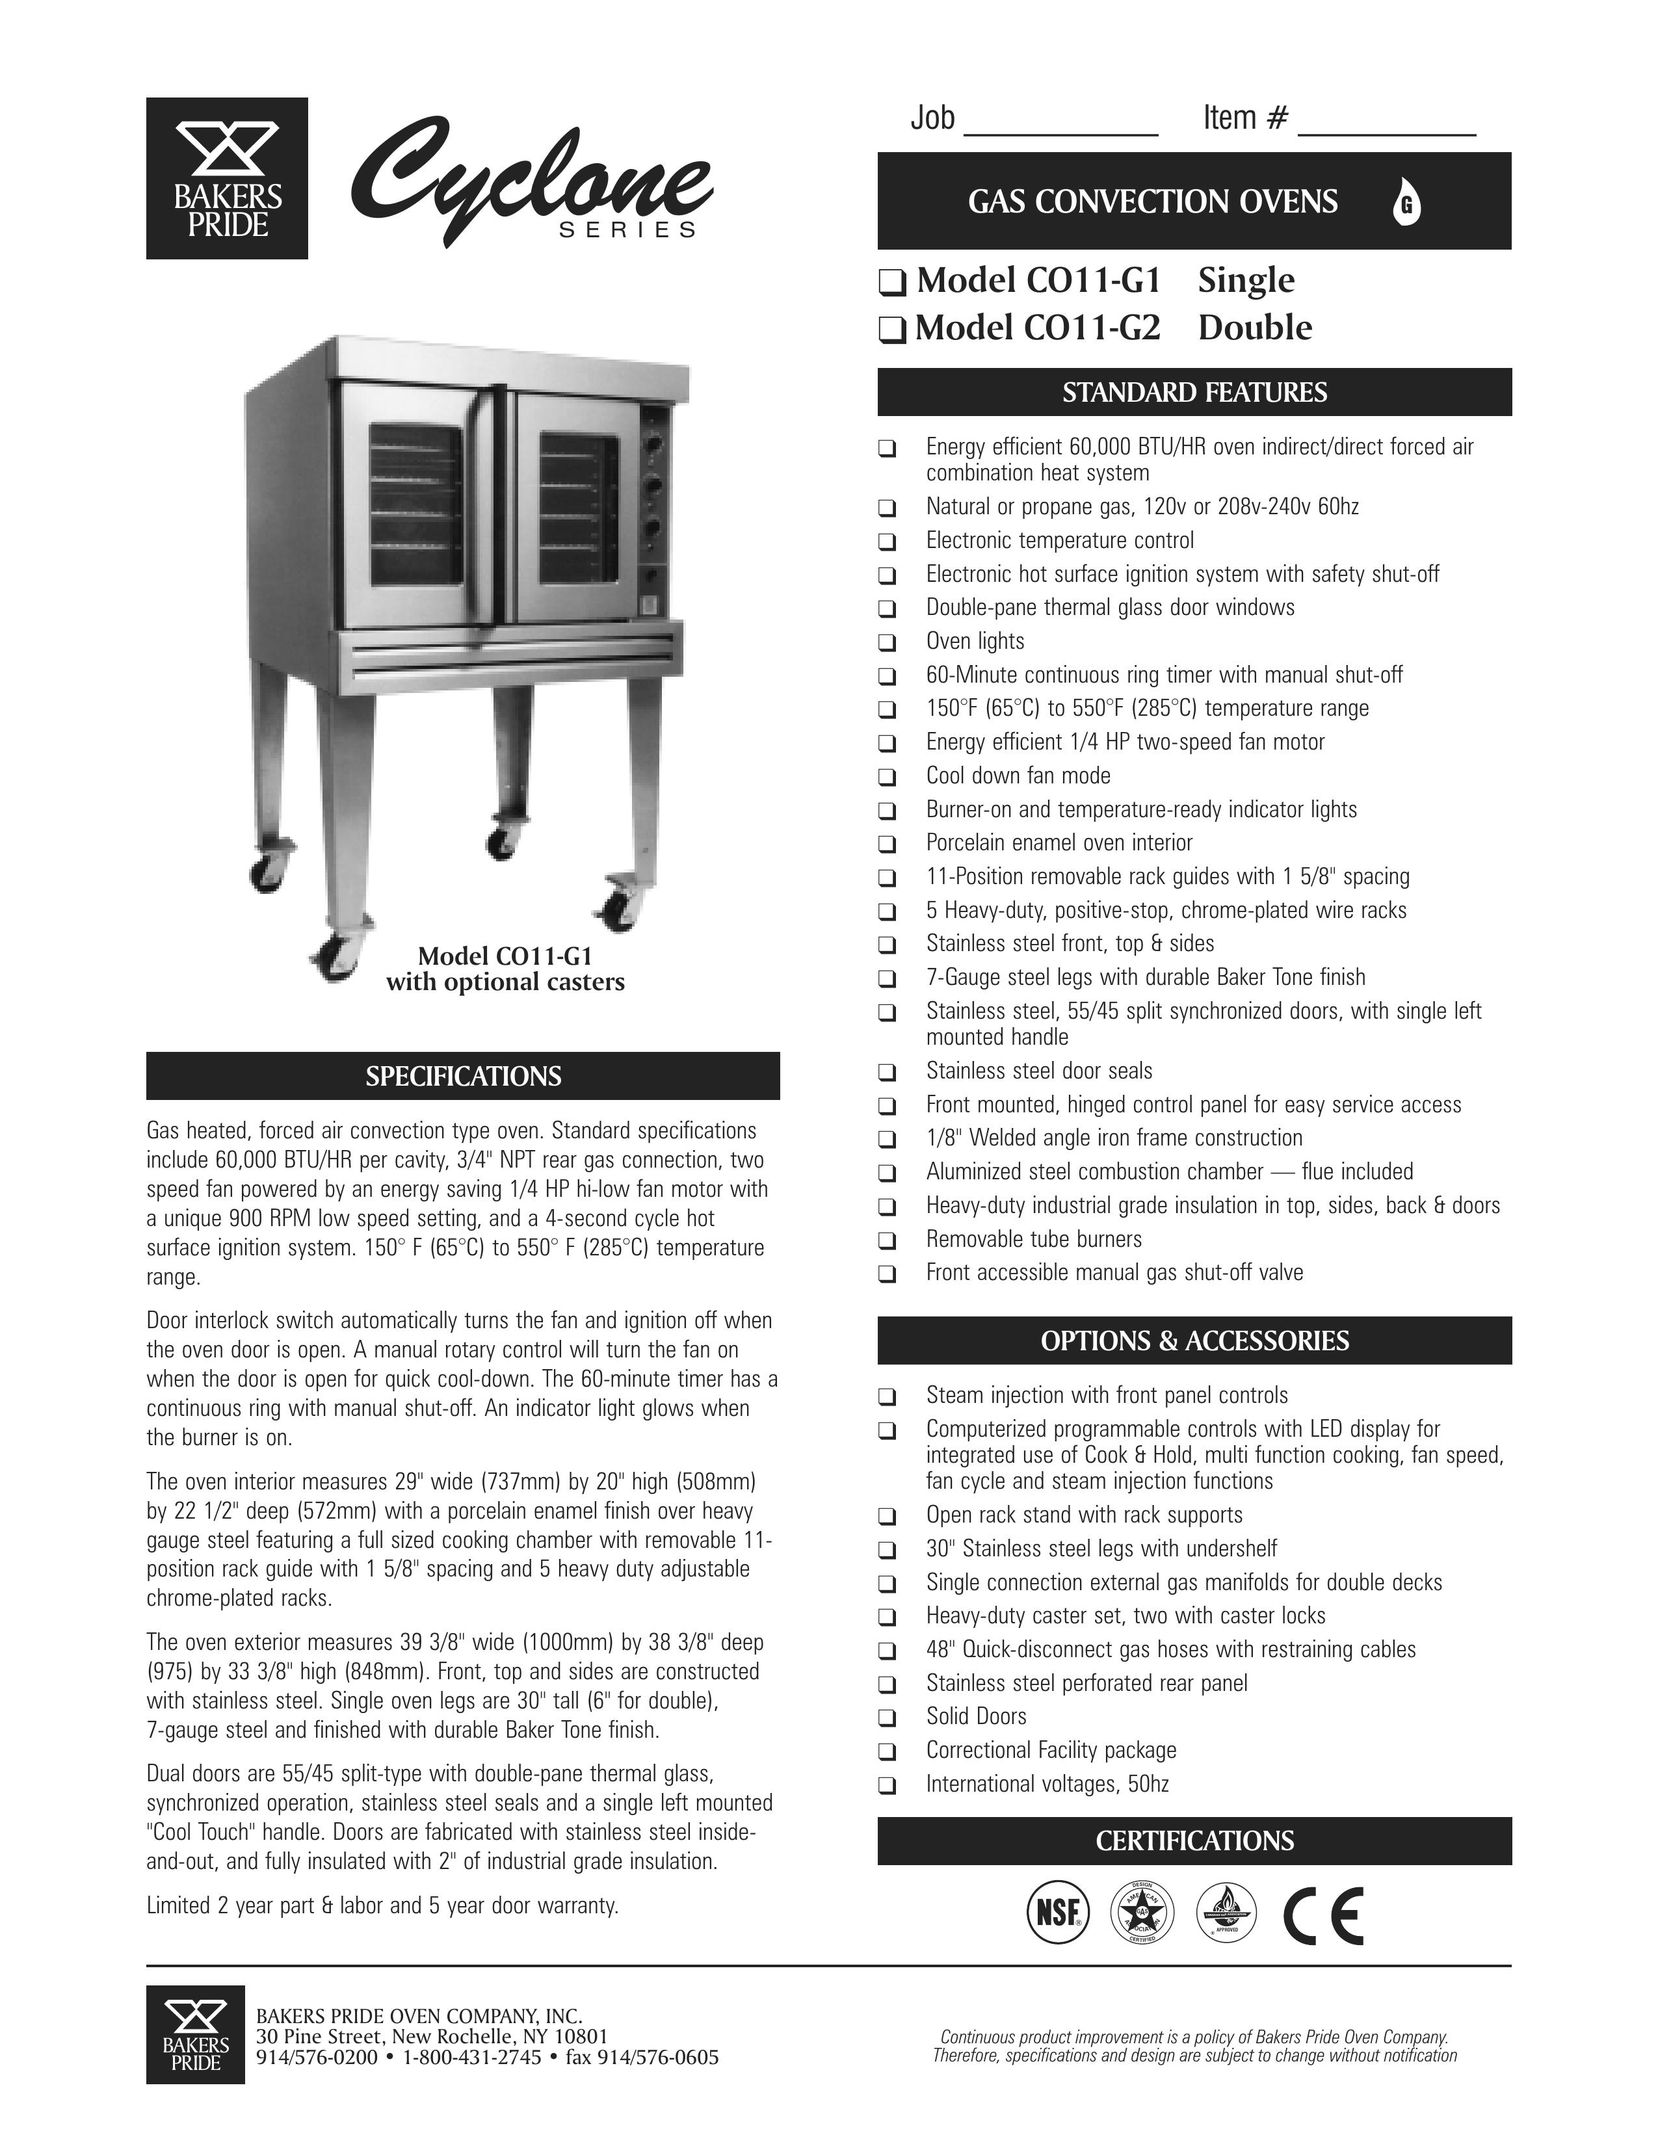 CyClone CO11-G1 Convection Oven User Manual